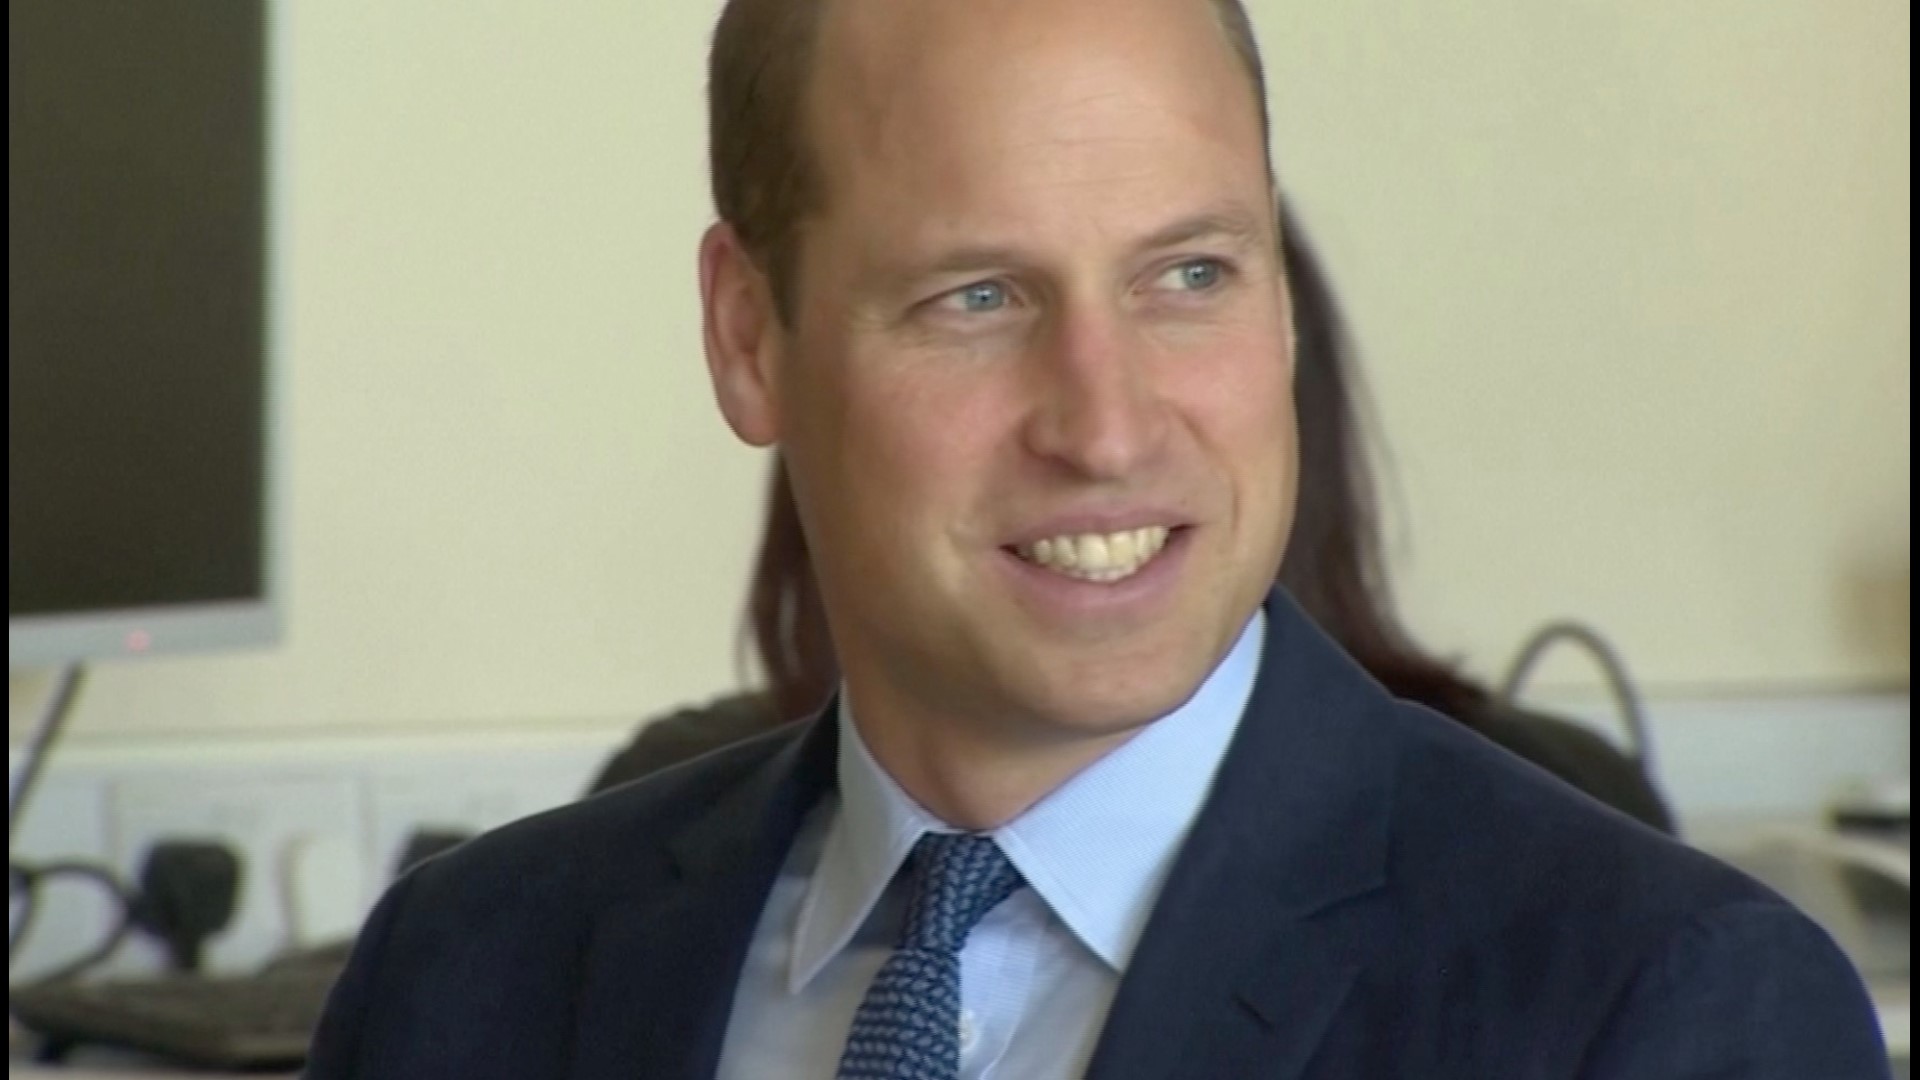 Prince William has a new documentary coming out on ITV, Prince William: A Planet for us All, and he chats about his own children. Buzz60's Keri Lumm has more.